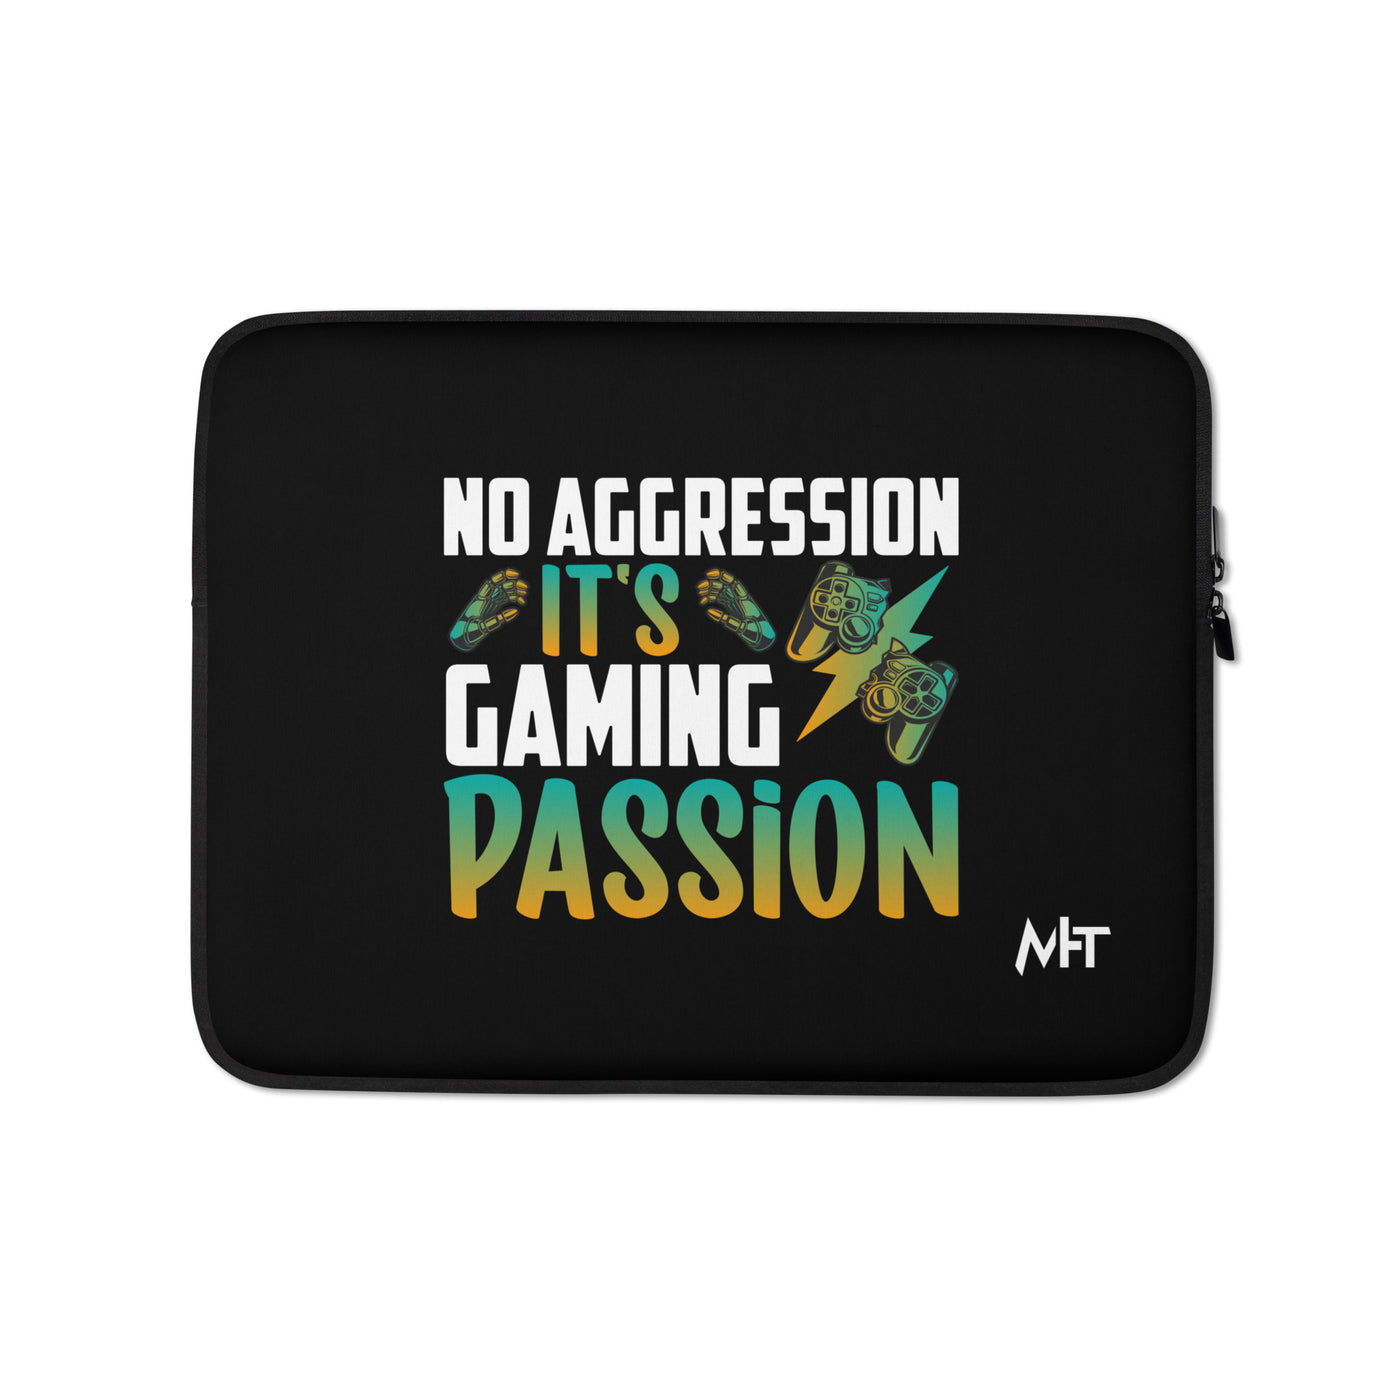 No Aggression, It's Gaming Passion - Laptop Sleeve